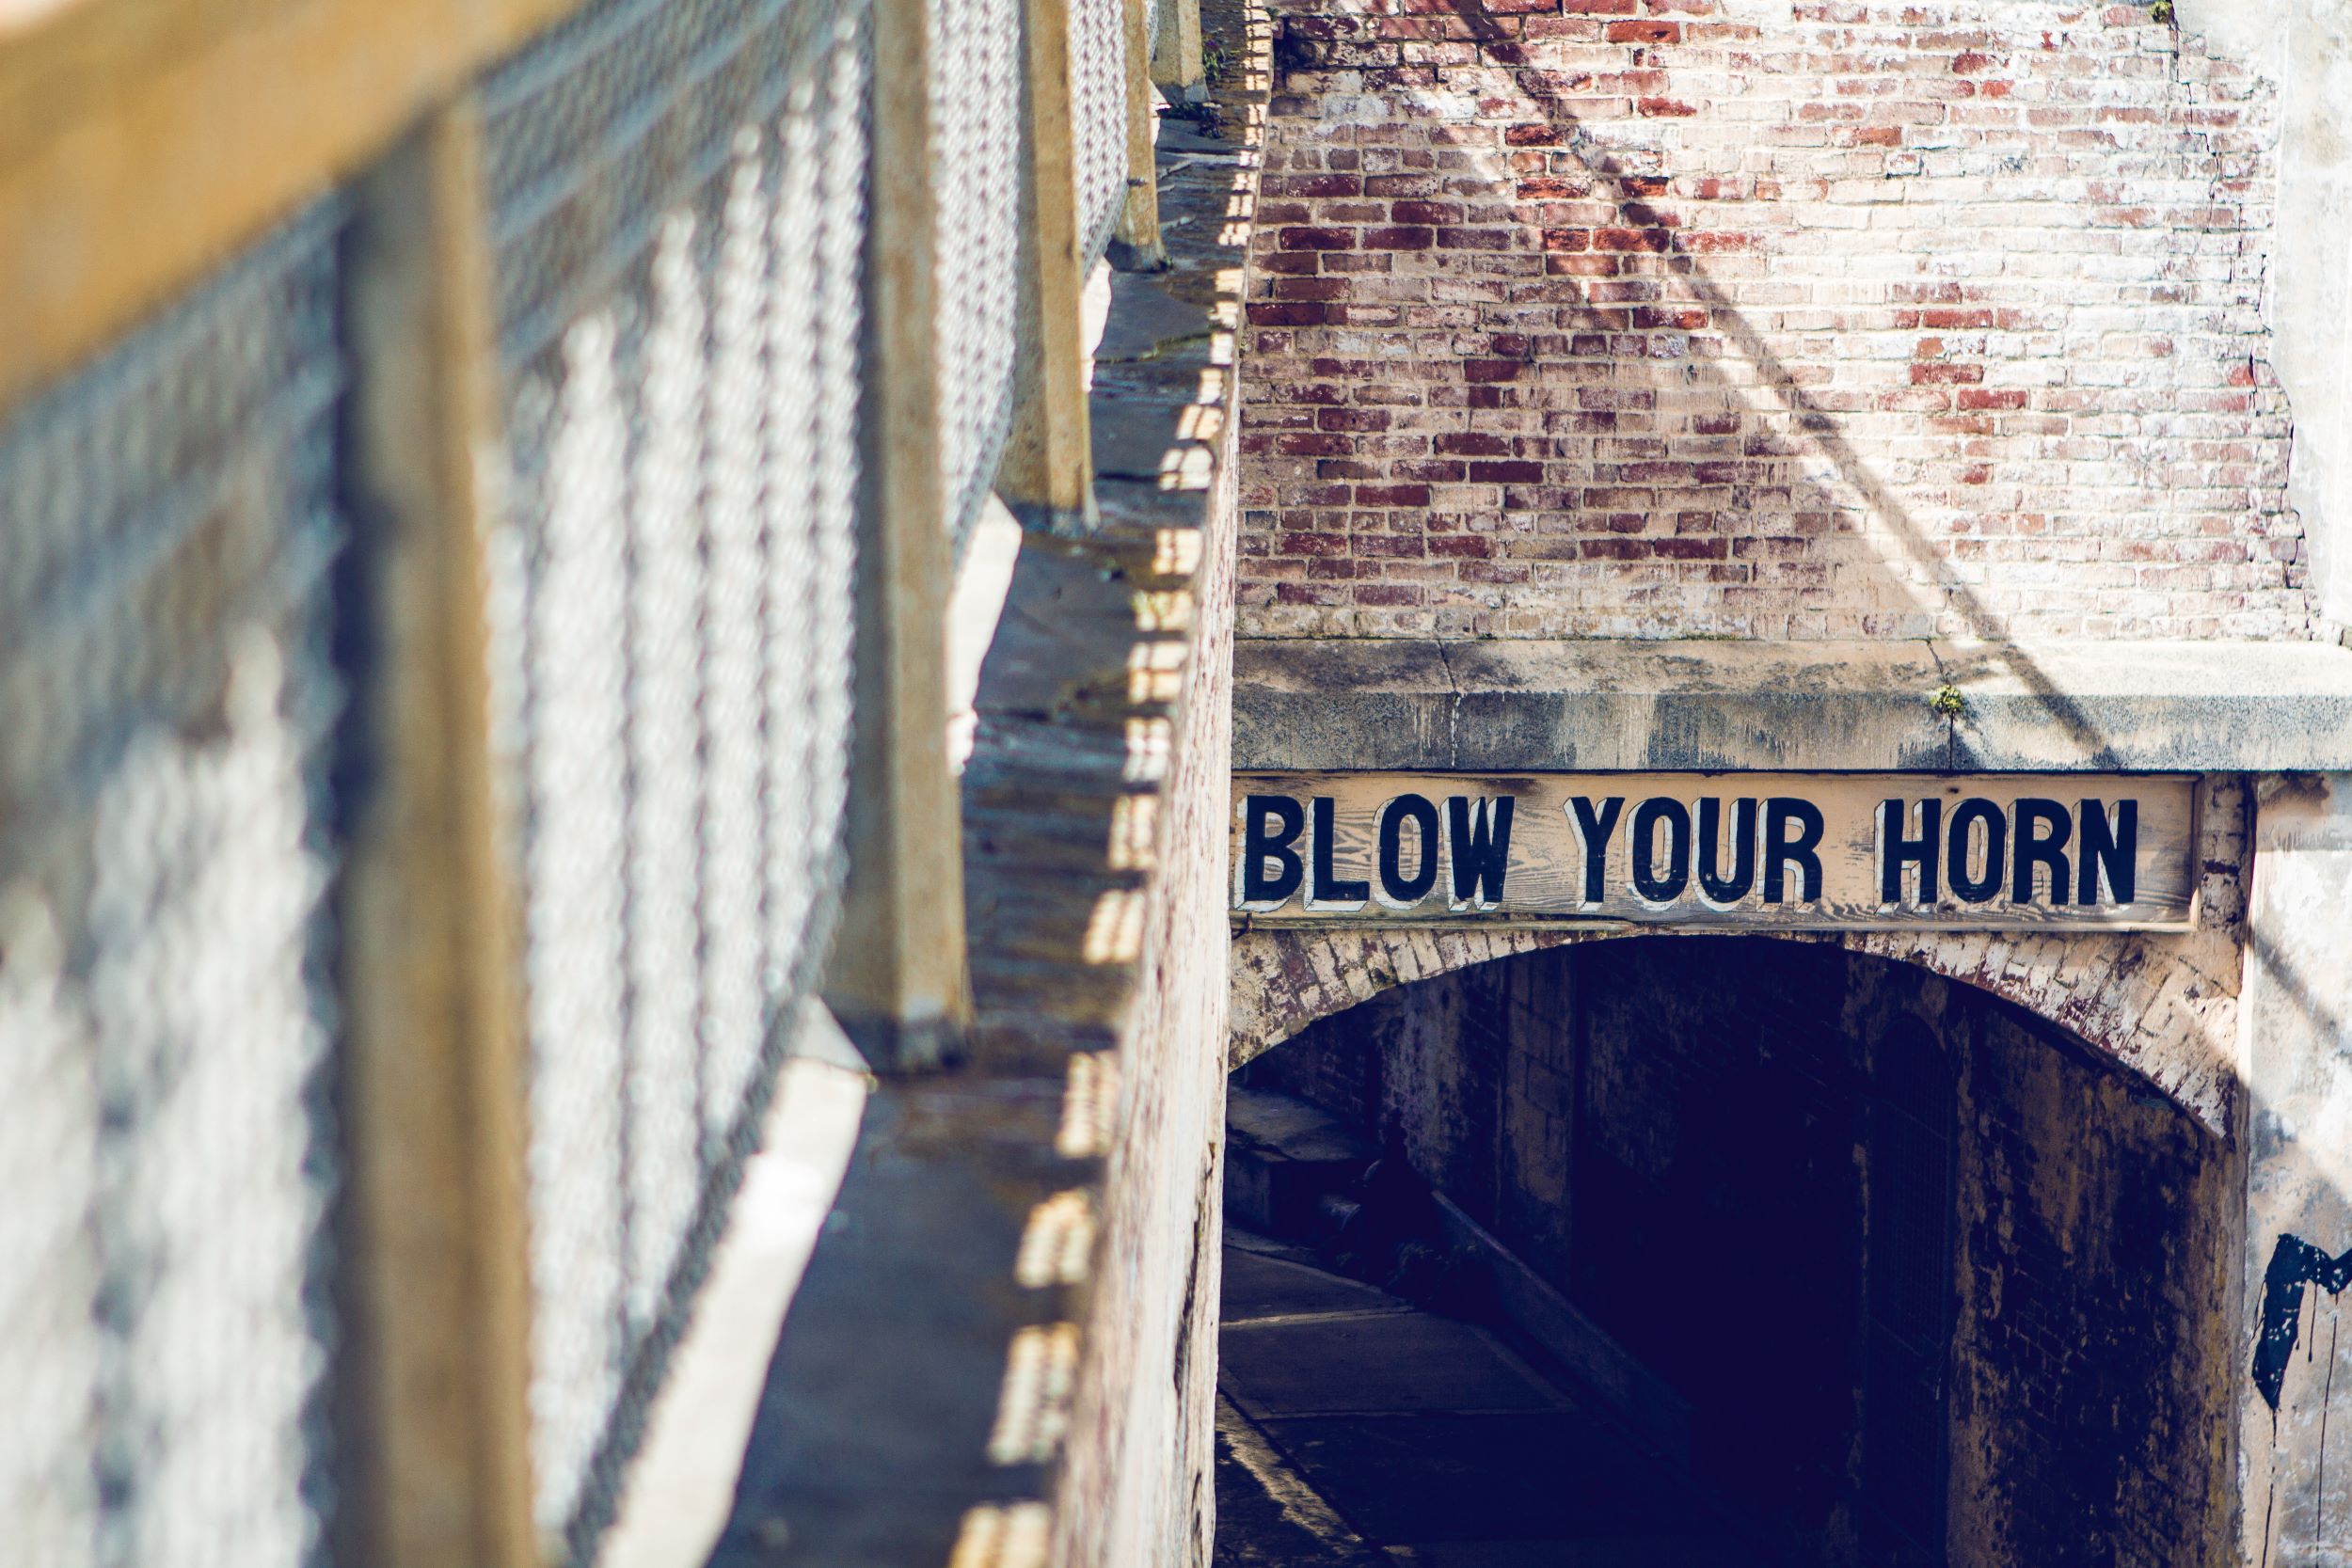 sign over tunnel that says "blow your horn"